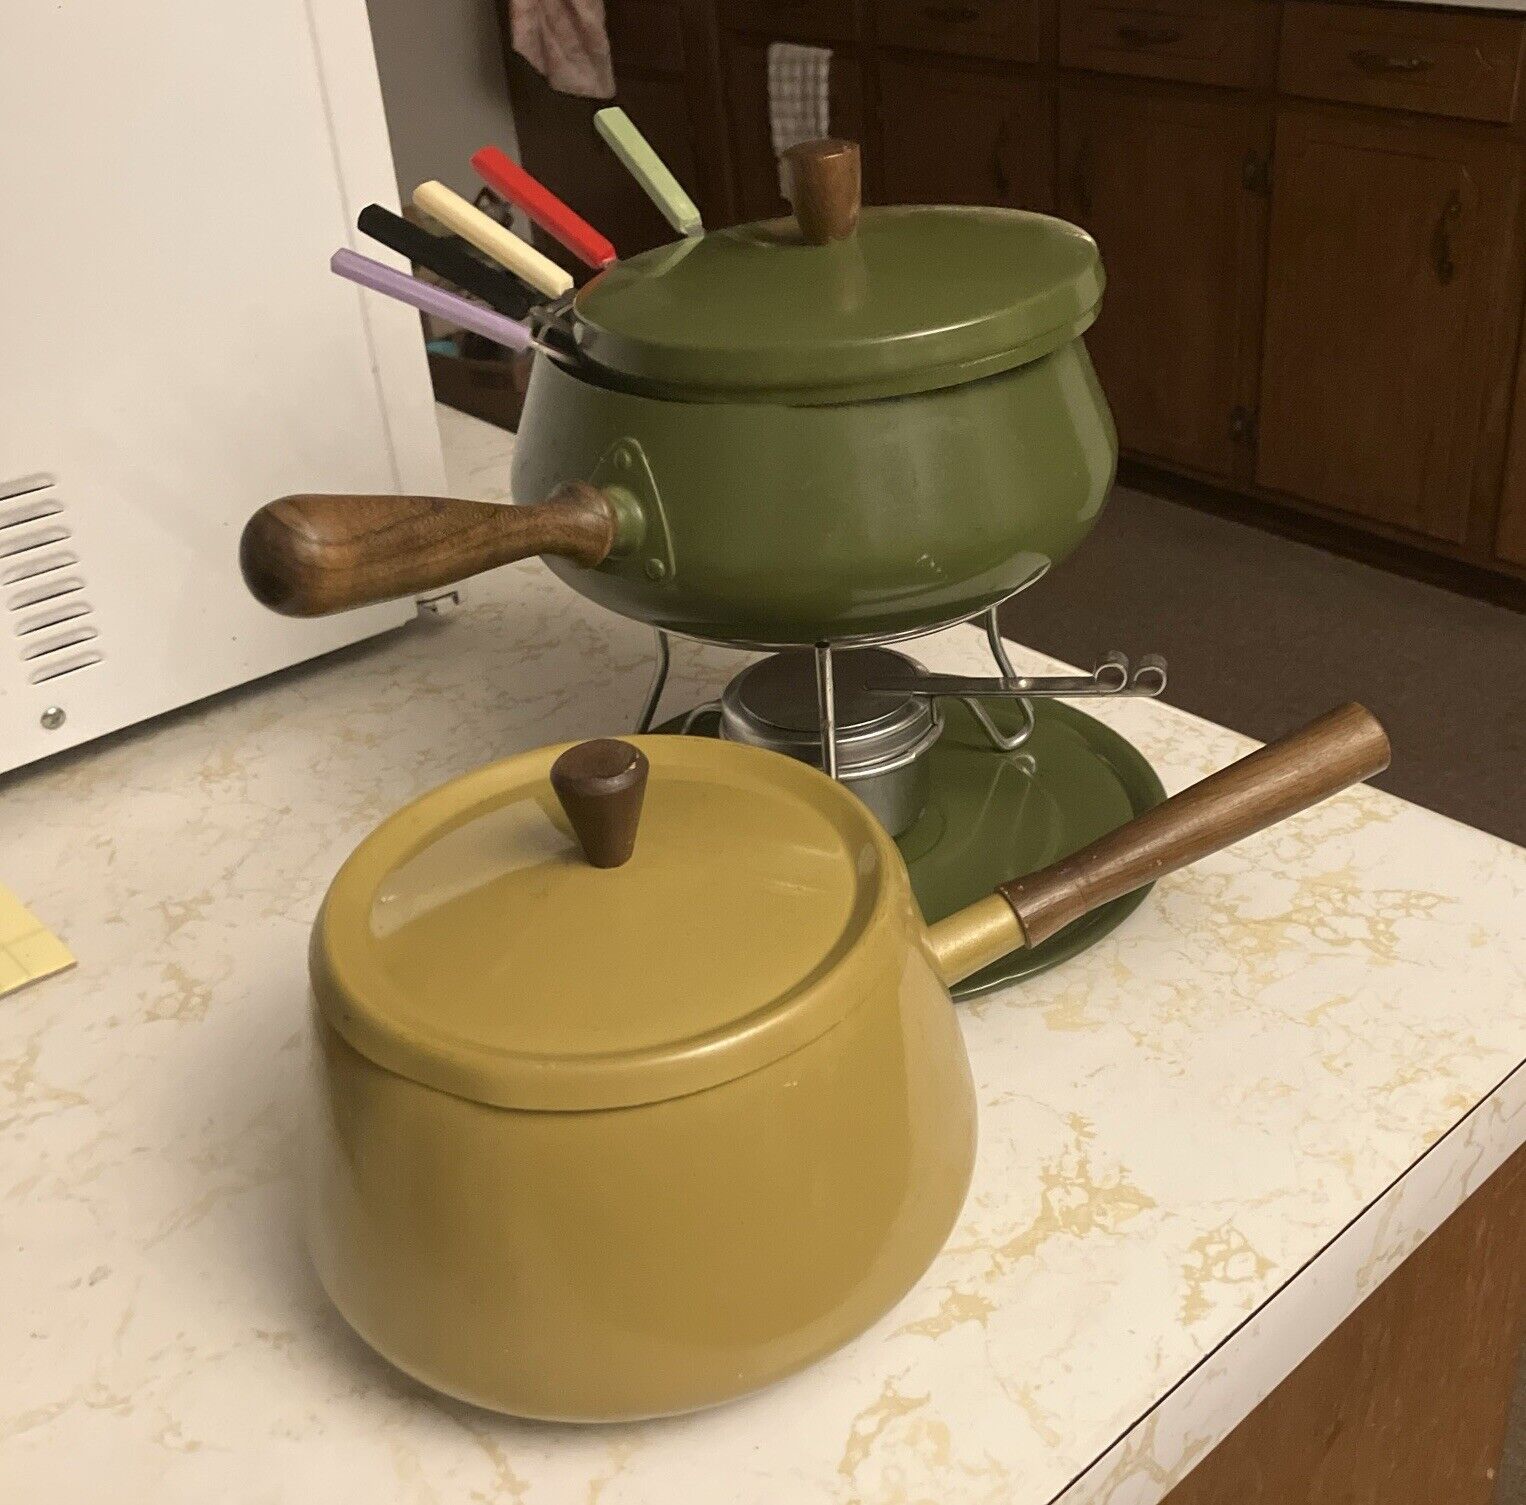 Lot of 2 Vintage Fondue Melting Cooking Pot Green With 5 Colorful Forks